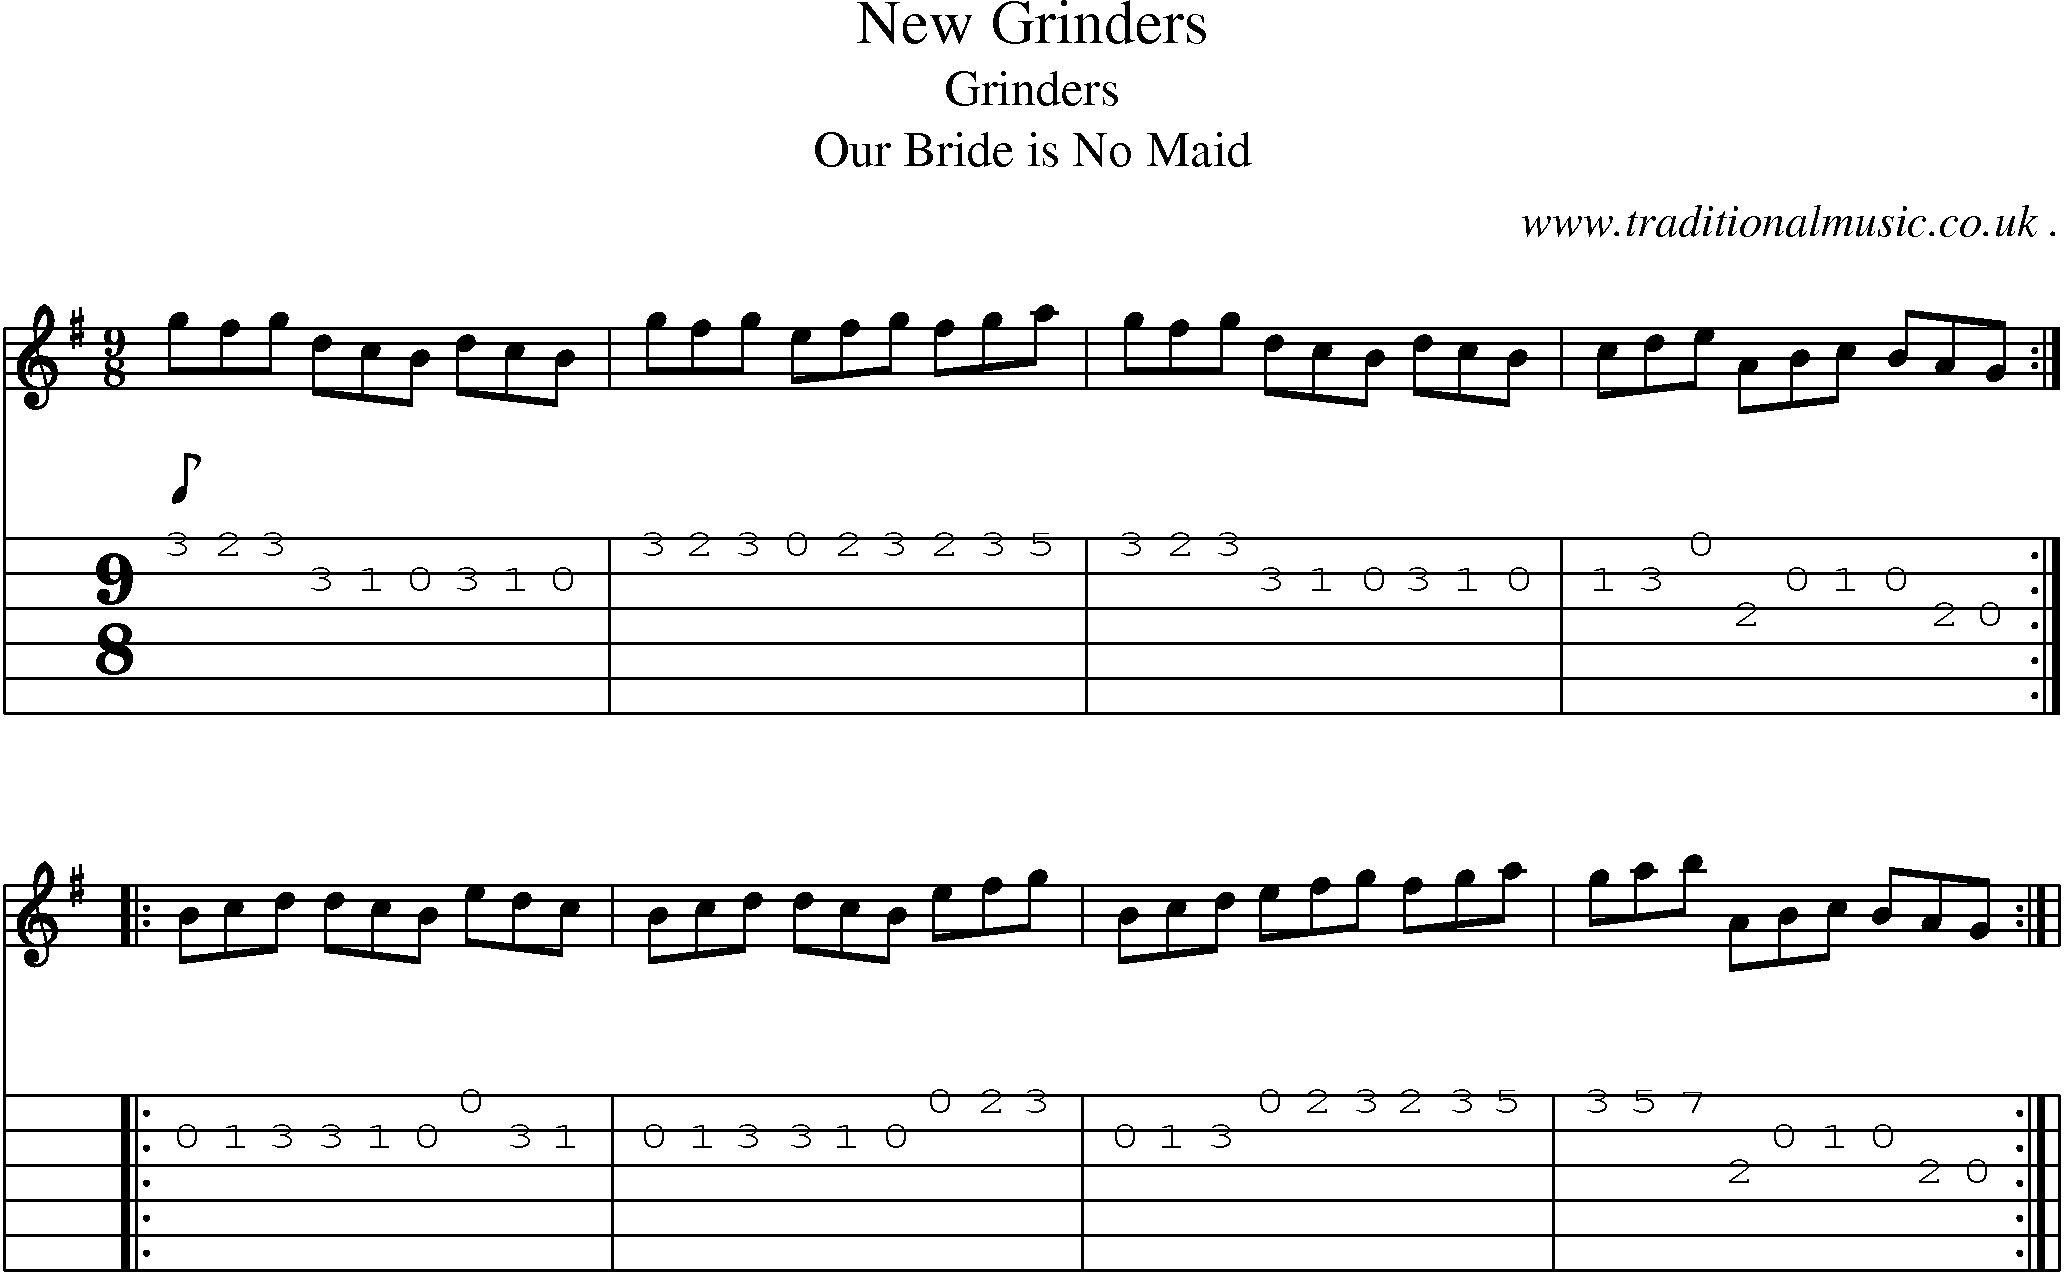 Sheet-Music and Guitar Tabs for New Grinders